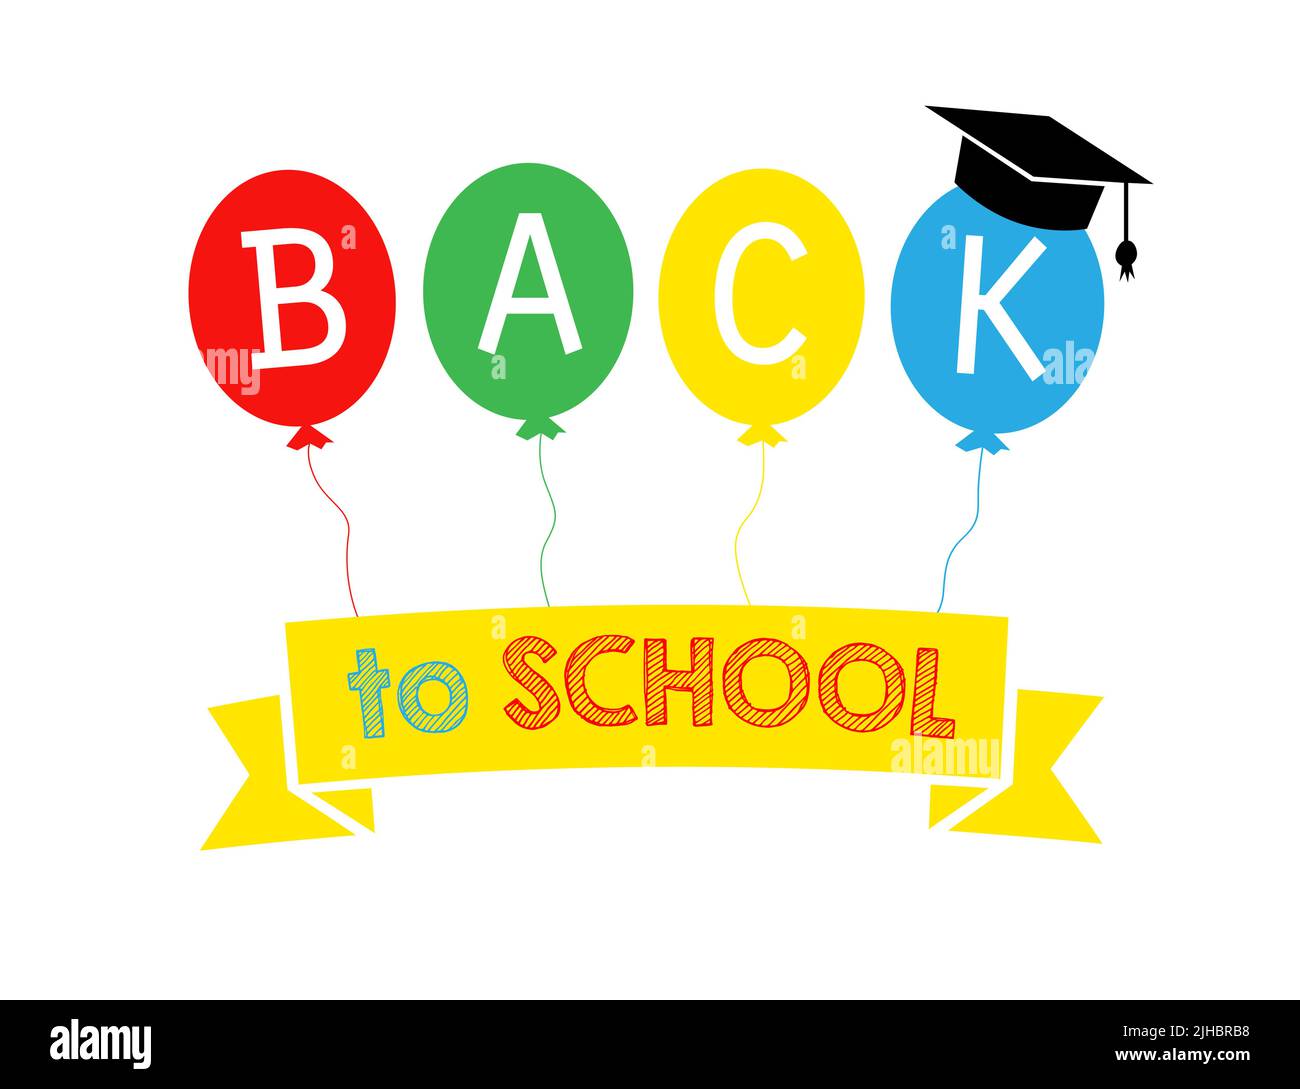 Back to School creative typography with colorful balloons. Vector school banner, icon or T shirt graphic concept. Isolated abstract design template. Stock Vector